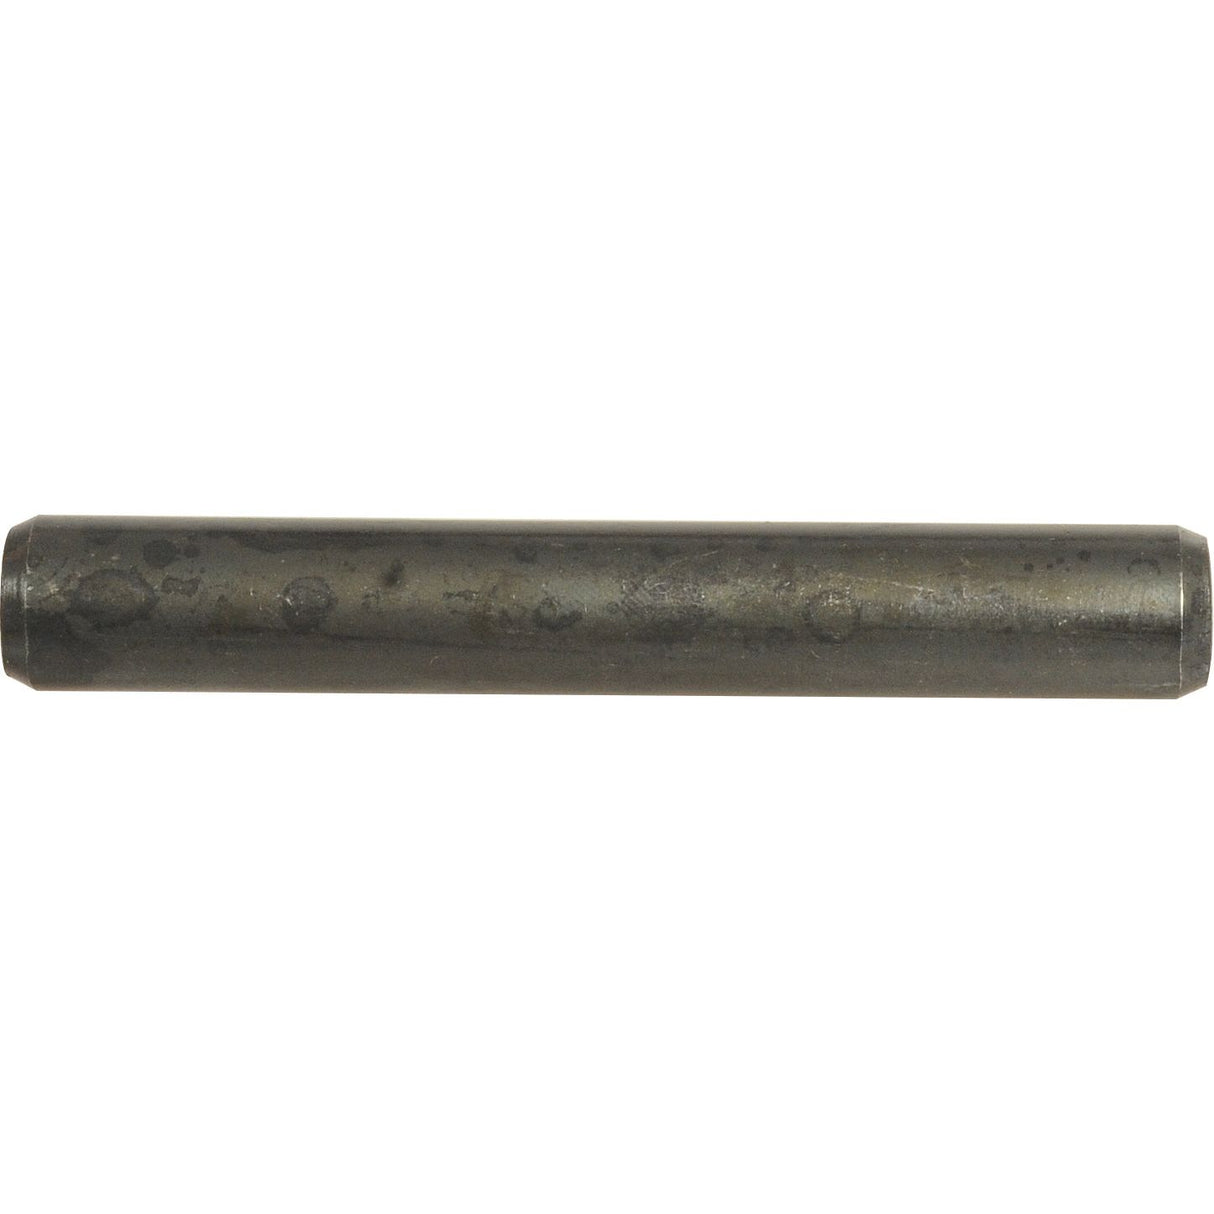 Imperial Roll Pin, Pin ⌀1/2'' x 3'' - S.1165 - Farming Parts